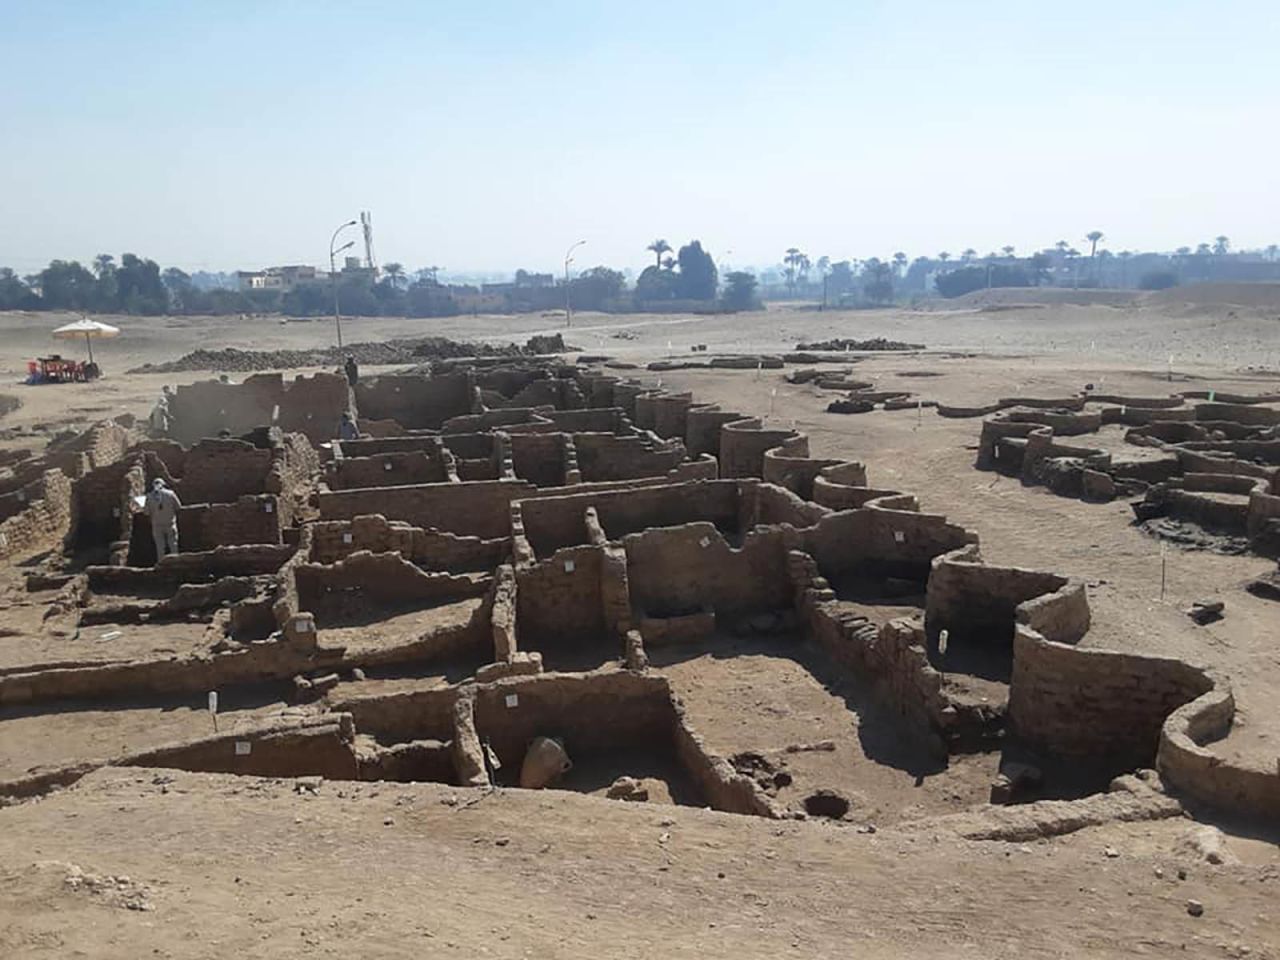 This 3,000-year-old city dates to the reign of Amenhotep III.